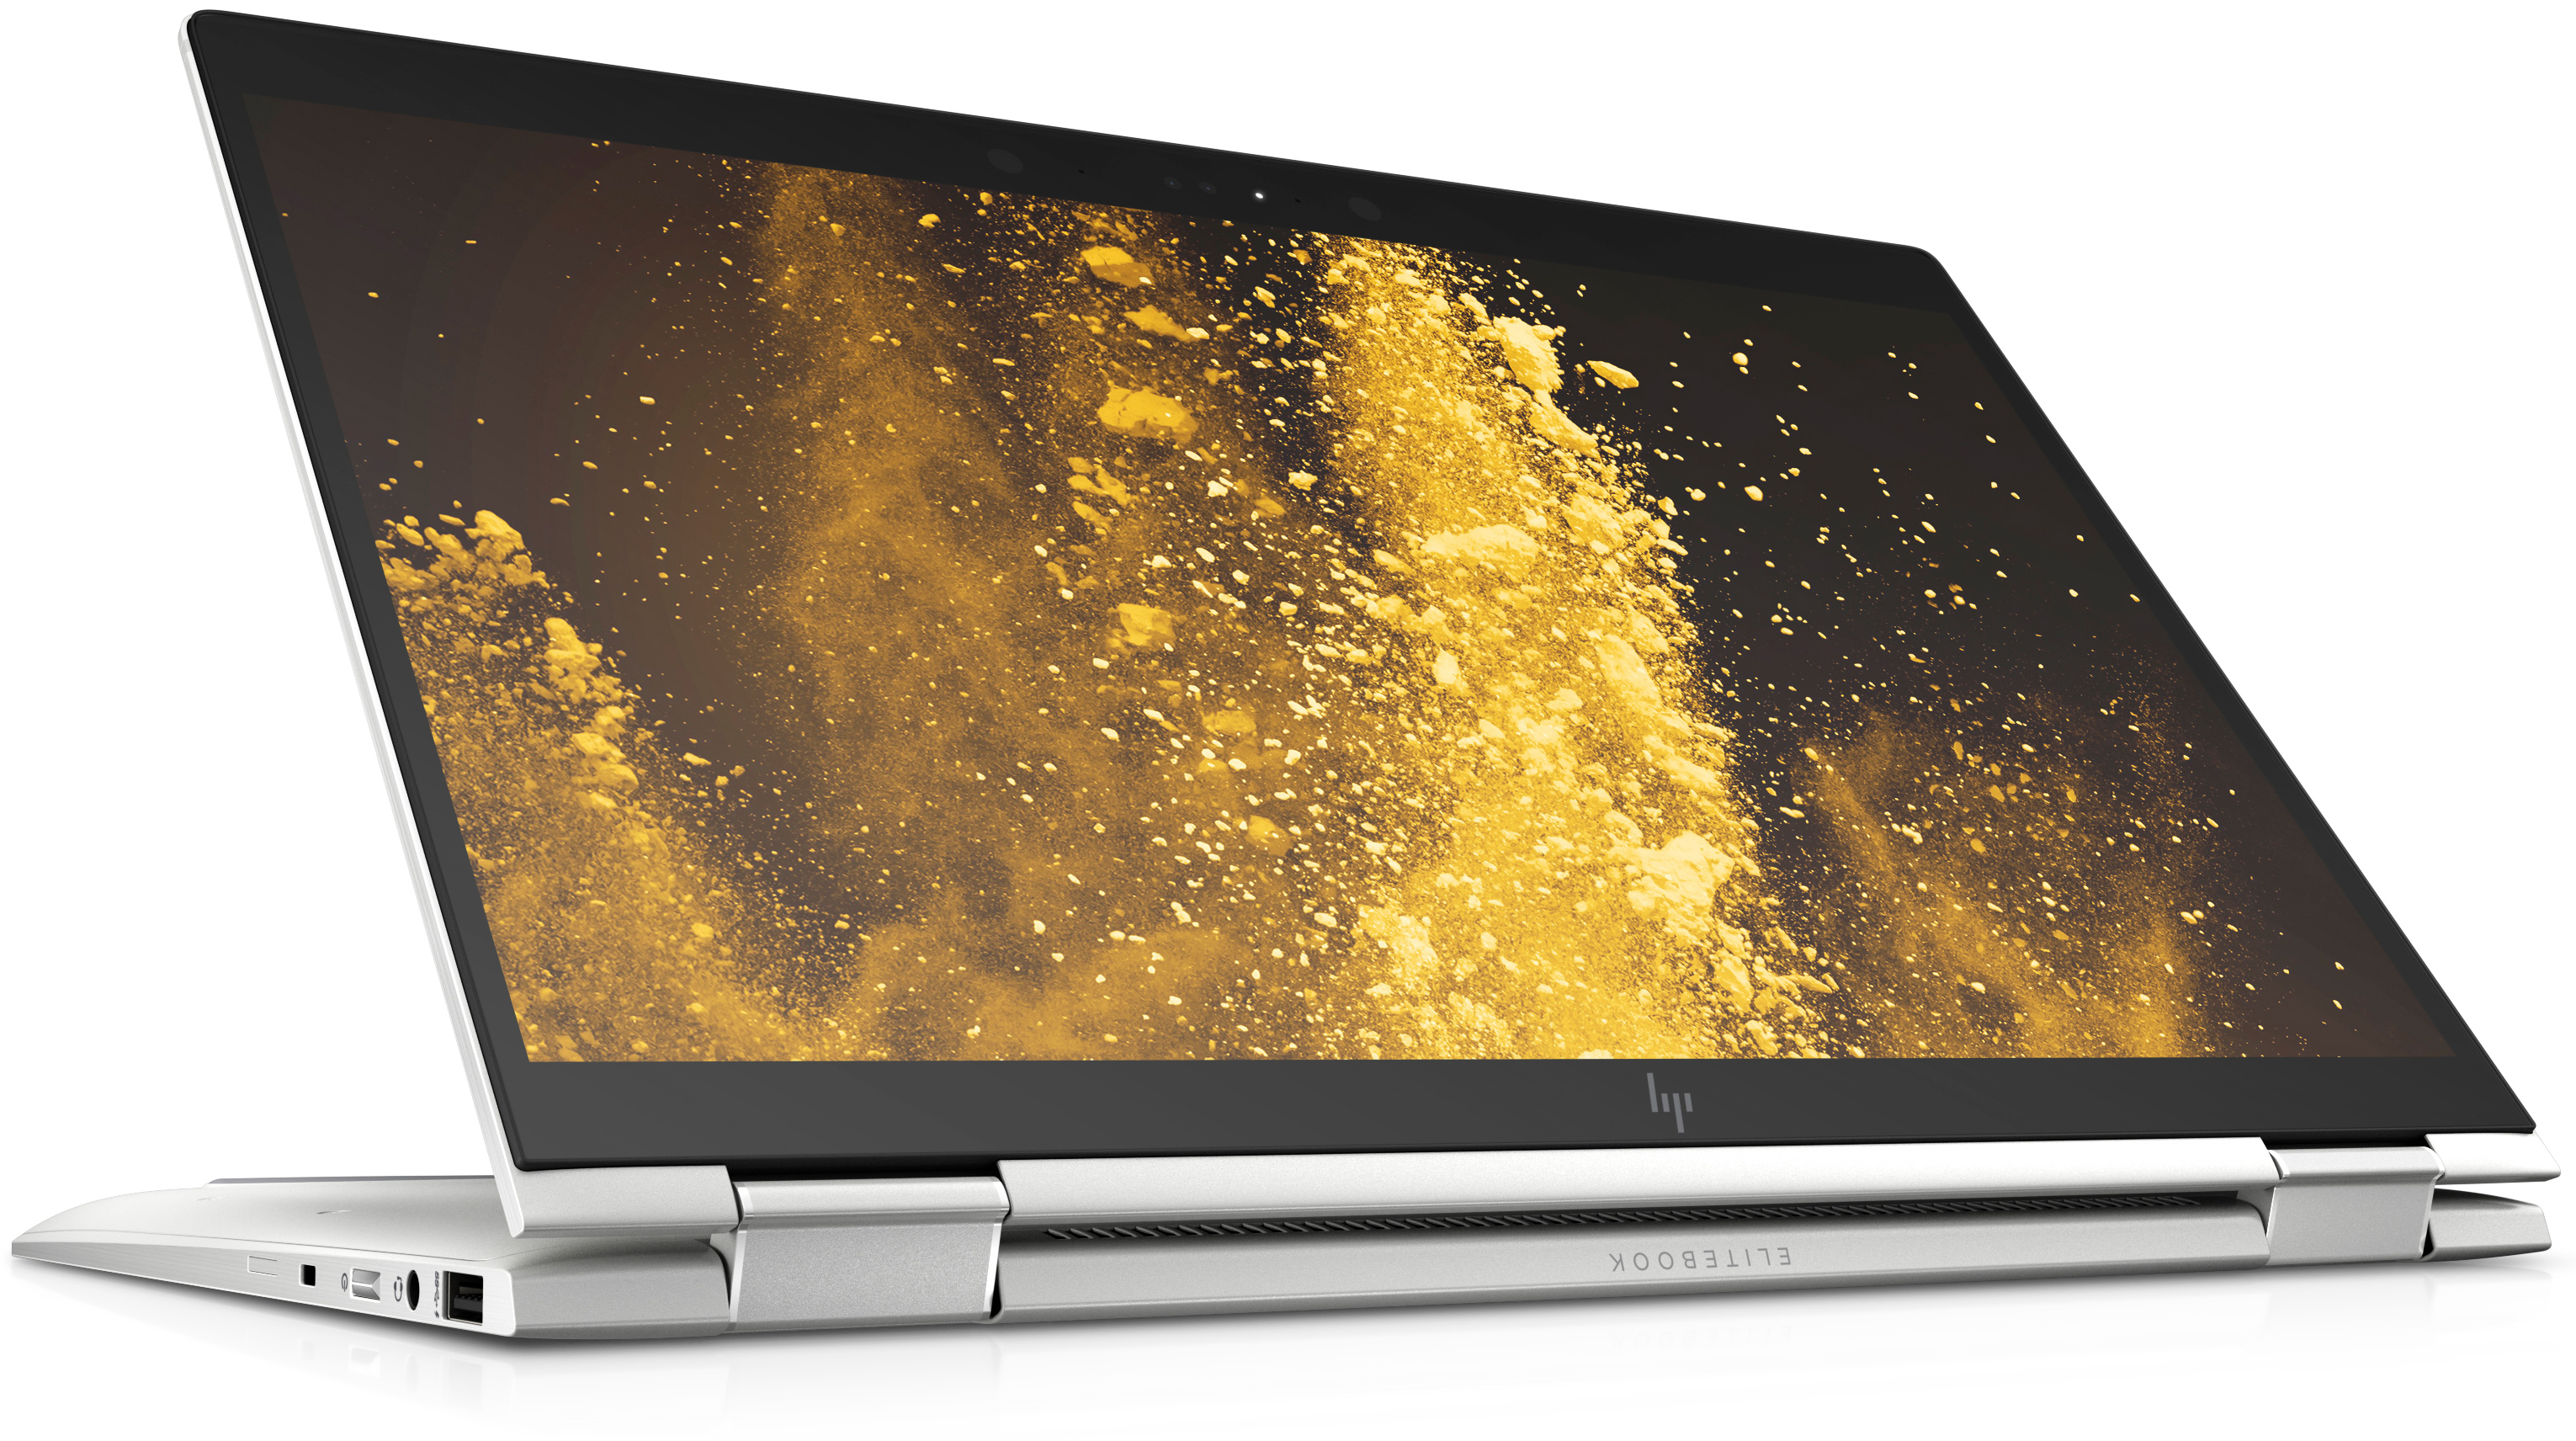 HP Launches EliteBook x360 1040 G5: Now with 14-Inch Display and 